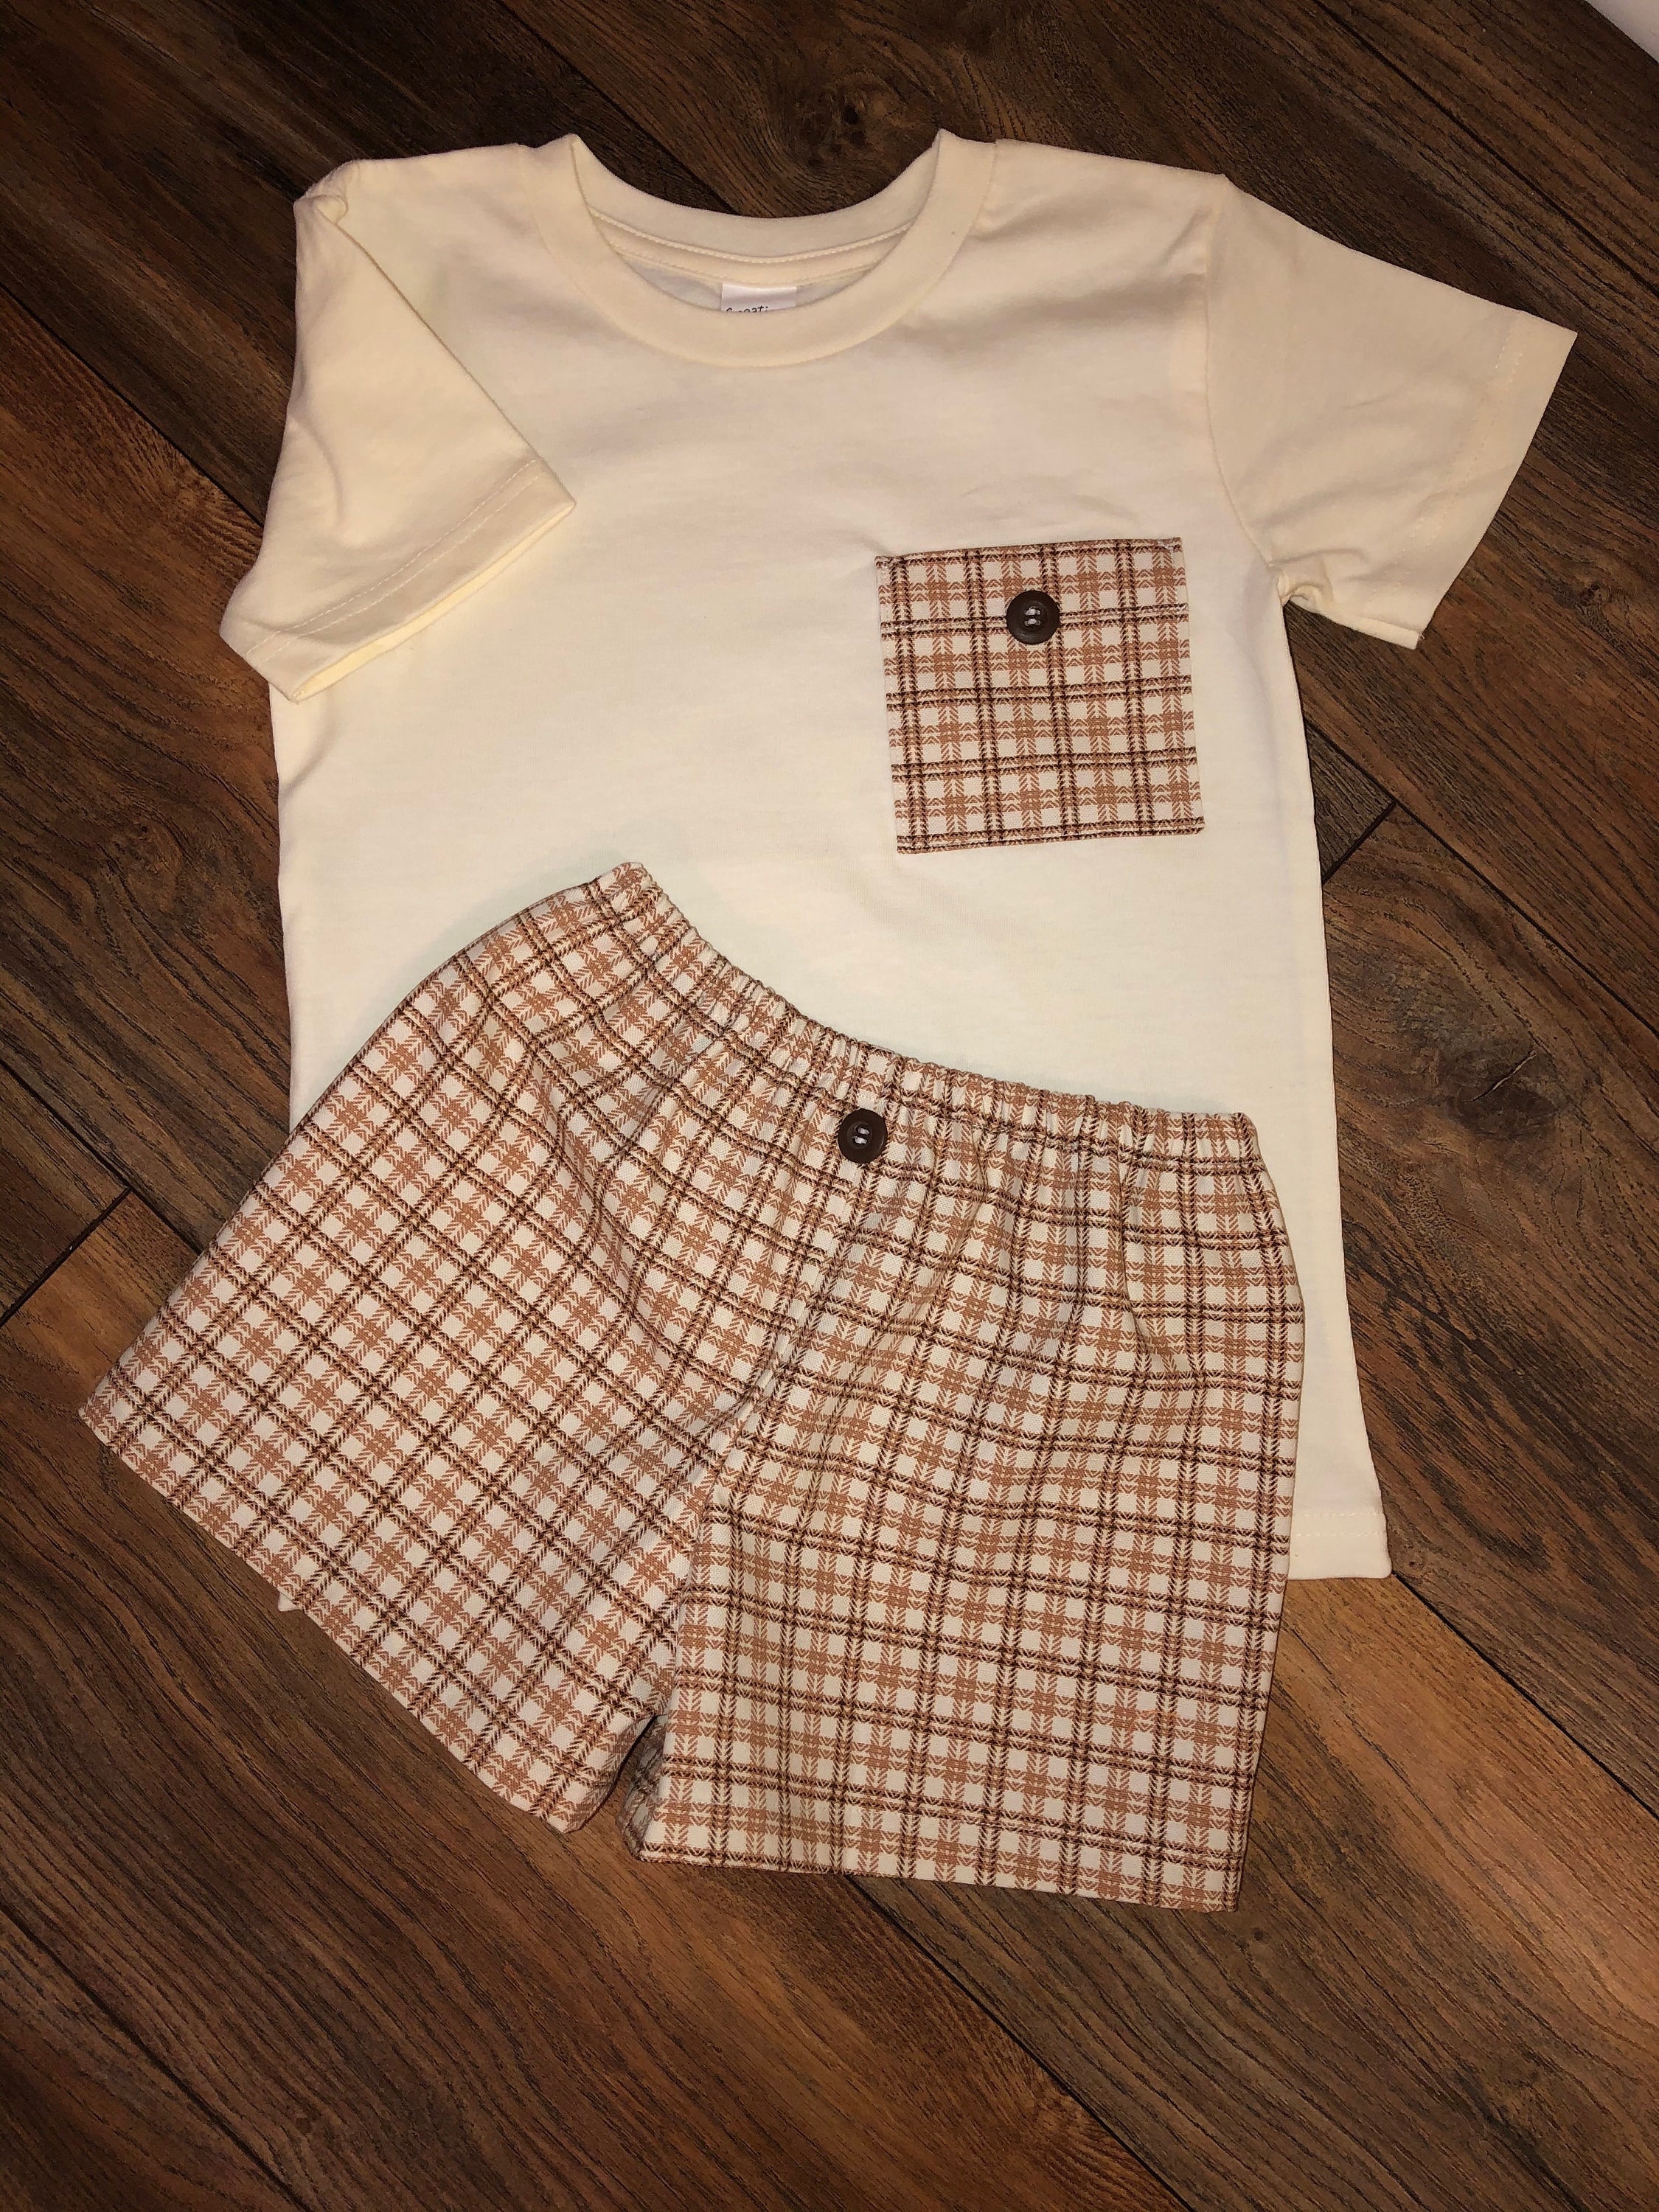 Vintage Plaid Fabric Shorts Set for Boys 3T-4T Brown Taupe - Etsy